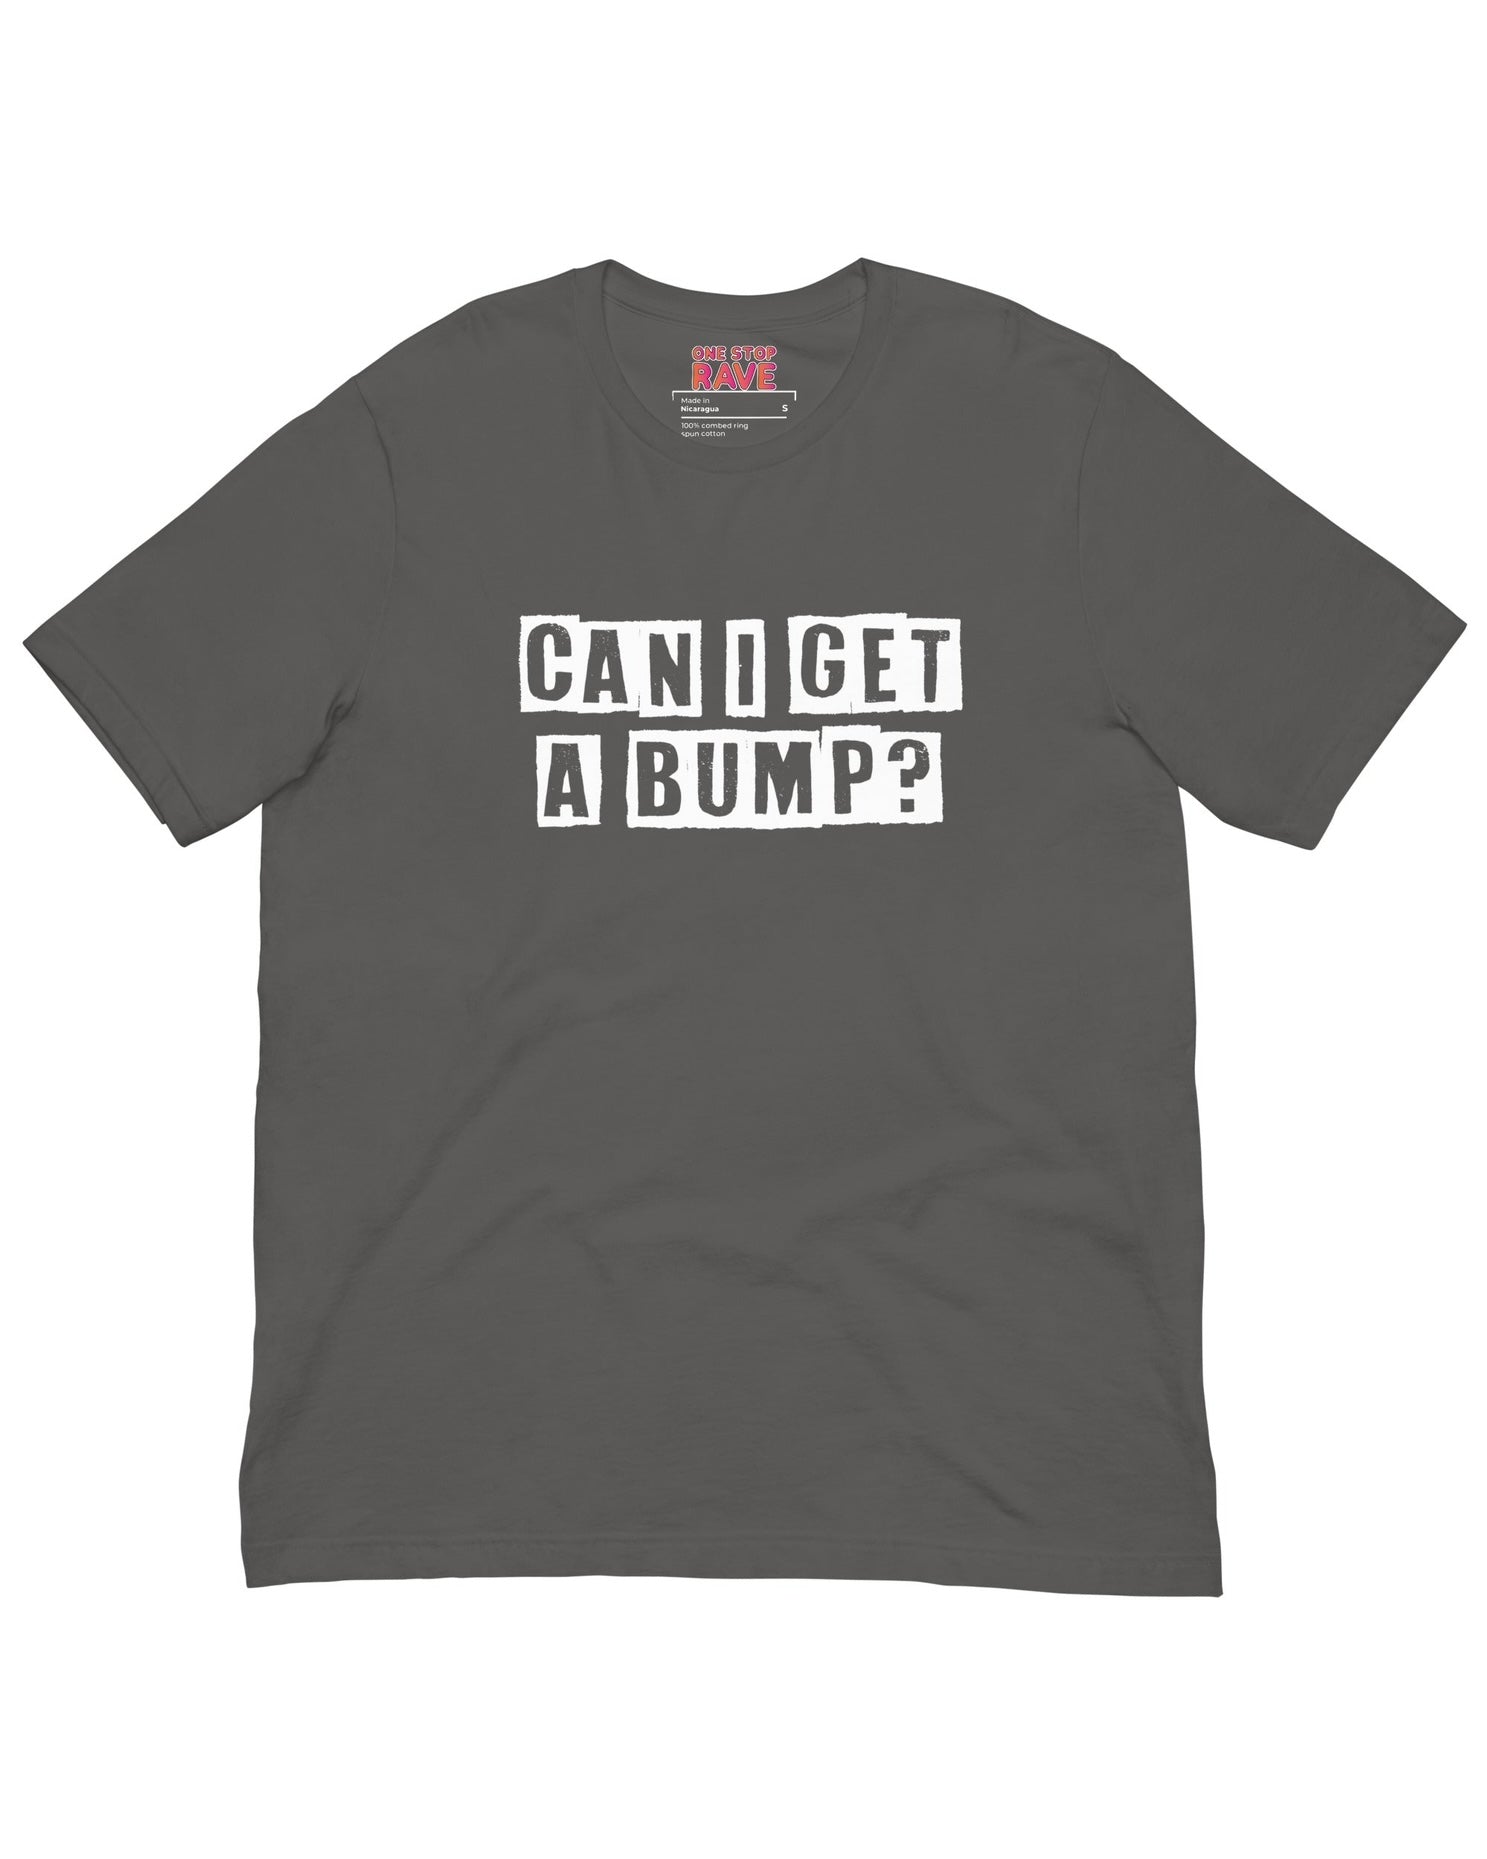 Asphalt Gray t-shirt with the phrase "CAN I GET A BUMP?" & OSR label